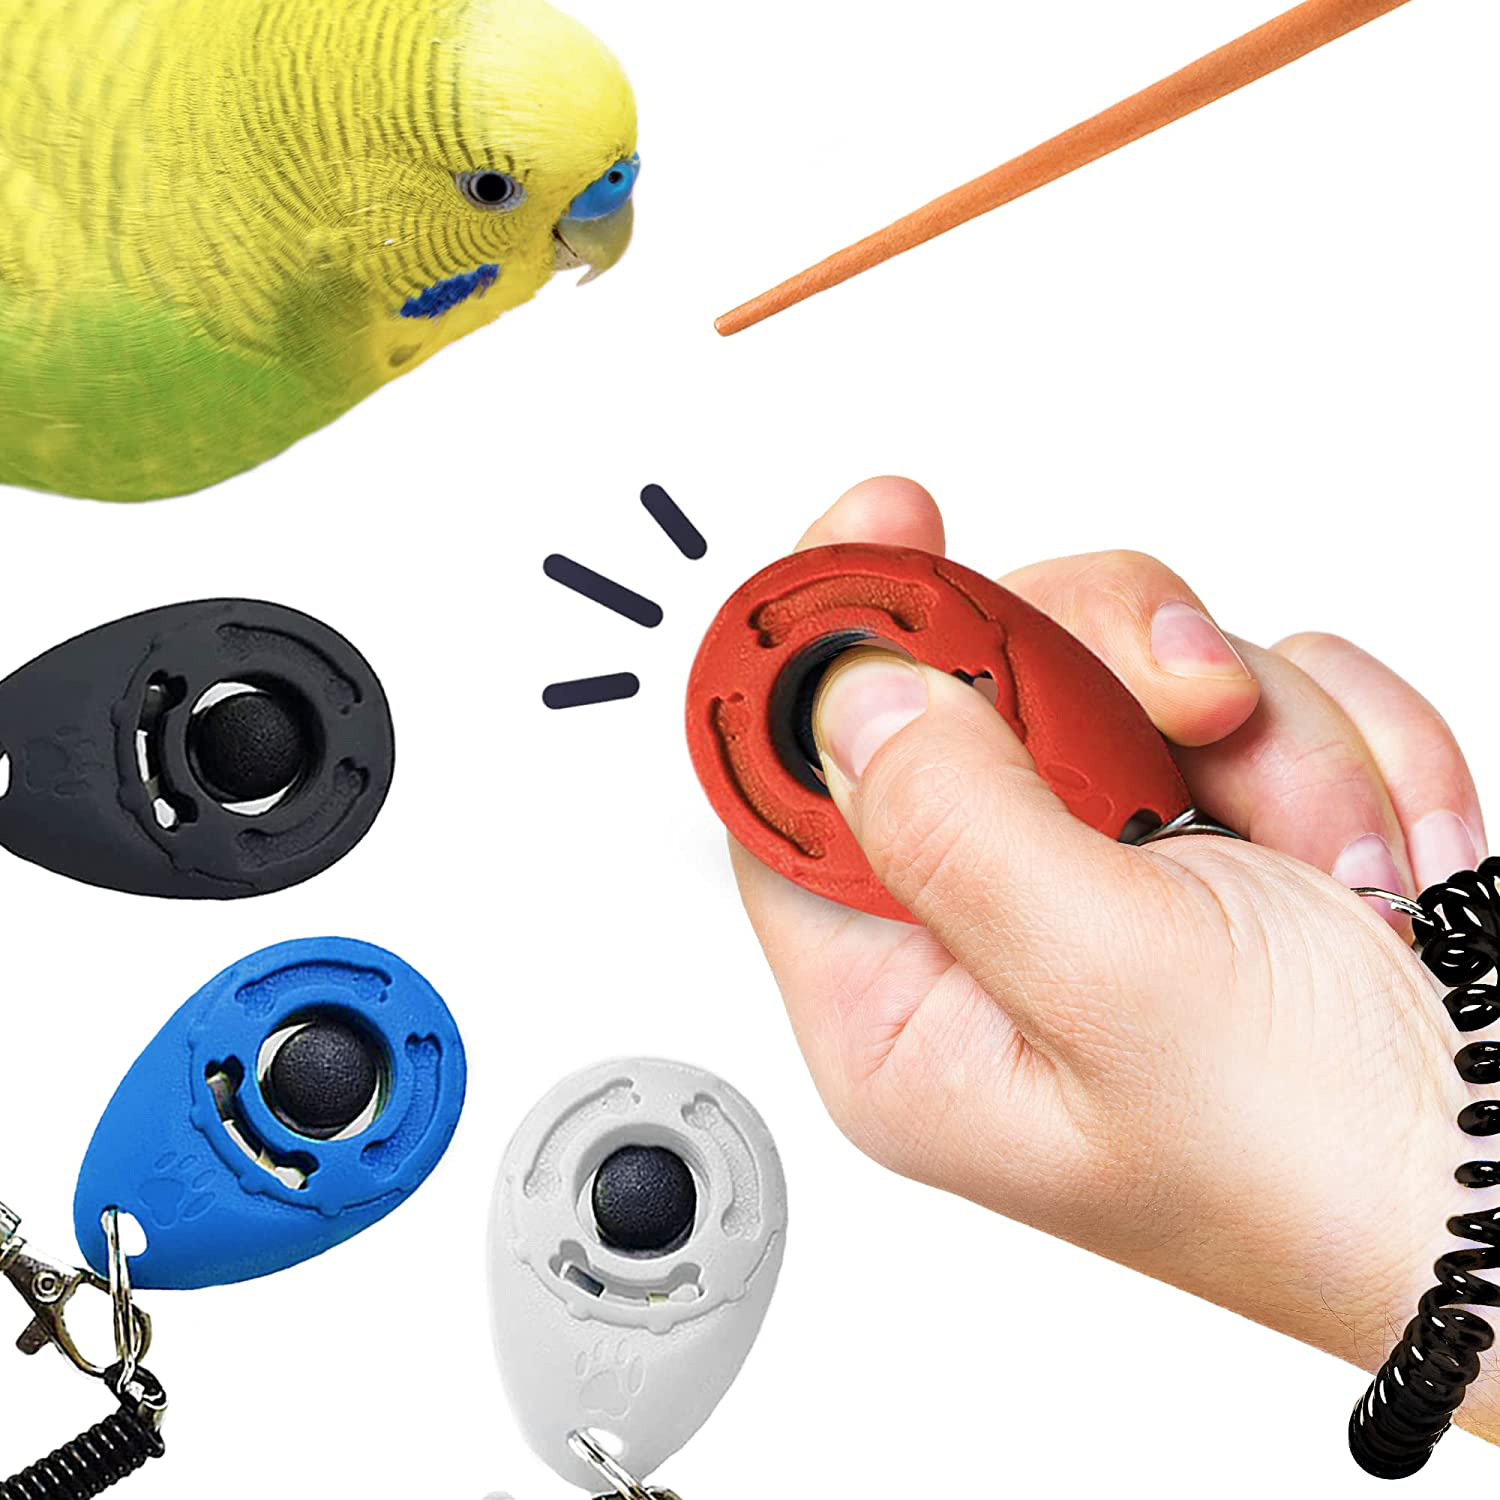 Sungrow Parrot Clickers With Black Wrist Bands, 2.4x1.8 Inches, Parrot Training